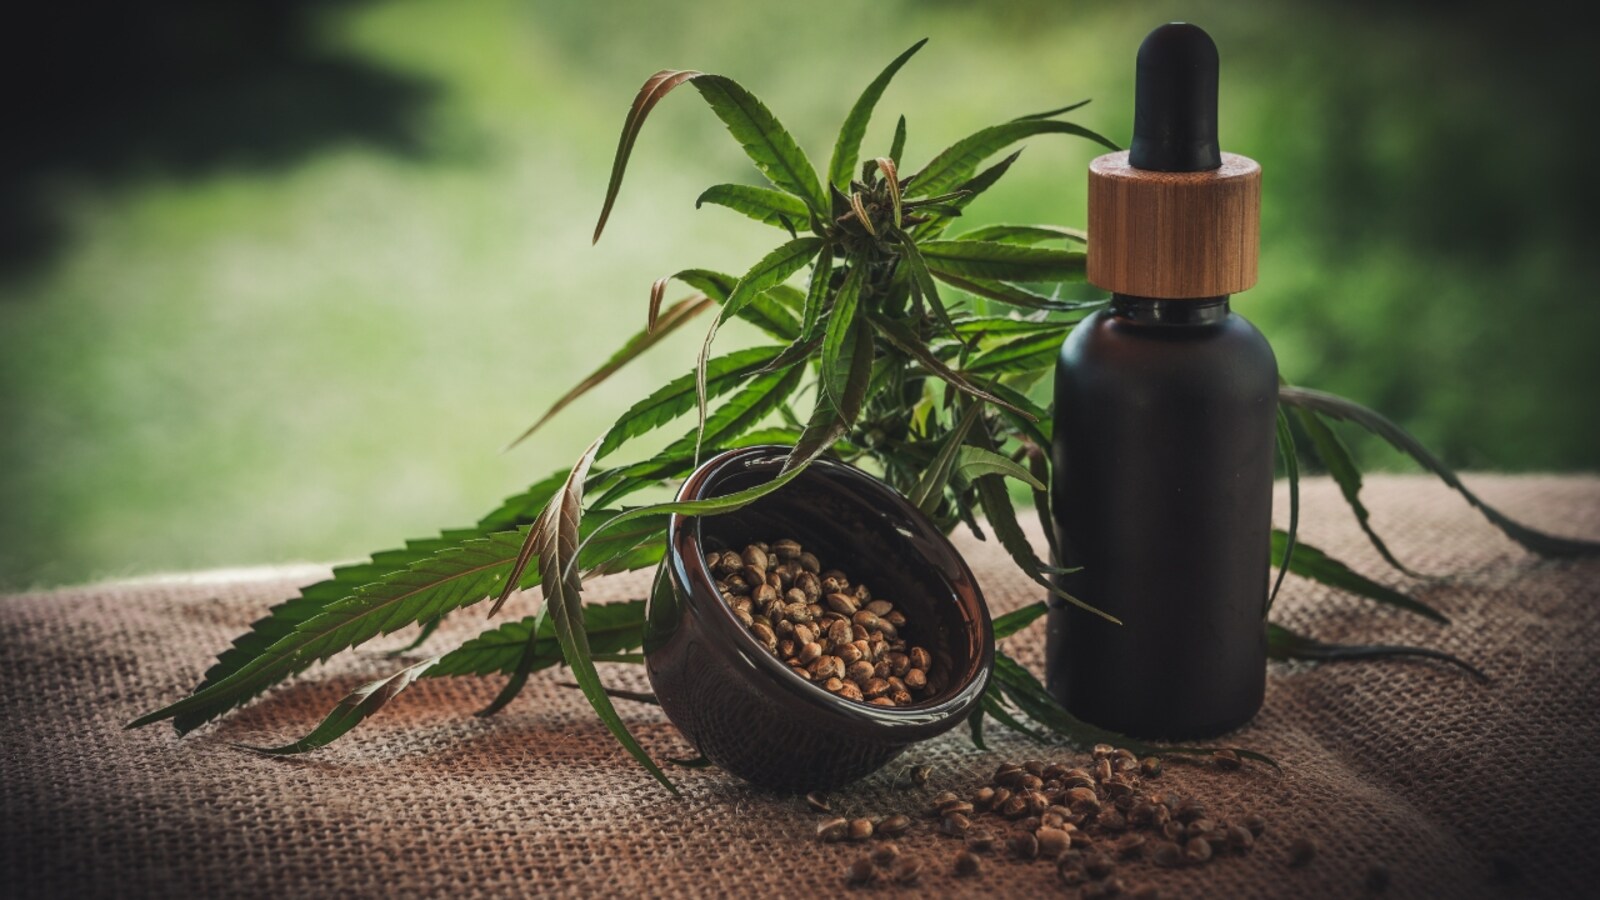 All about CBD oil: The hype, health benefits, and dangerous side-effects  you need to know